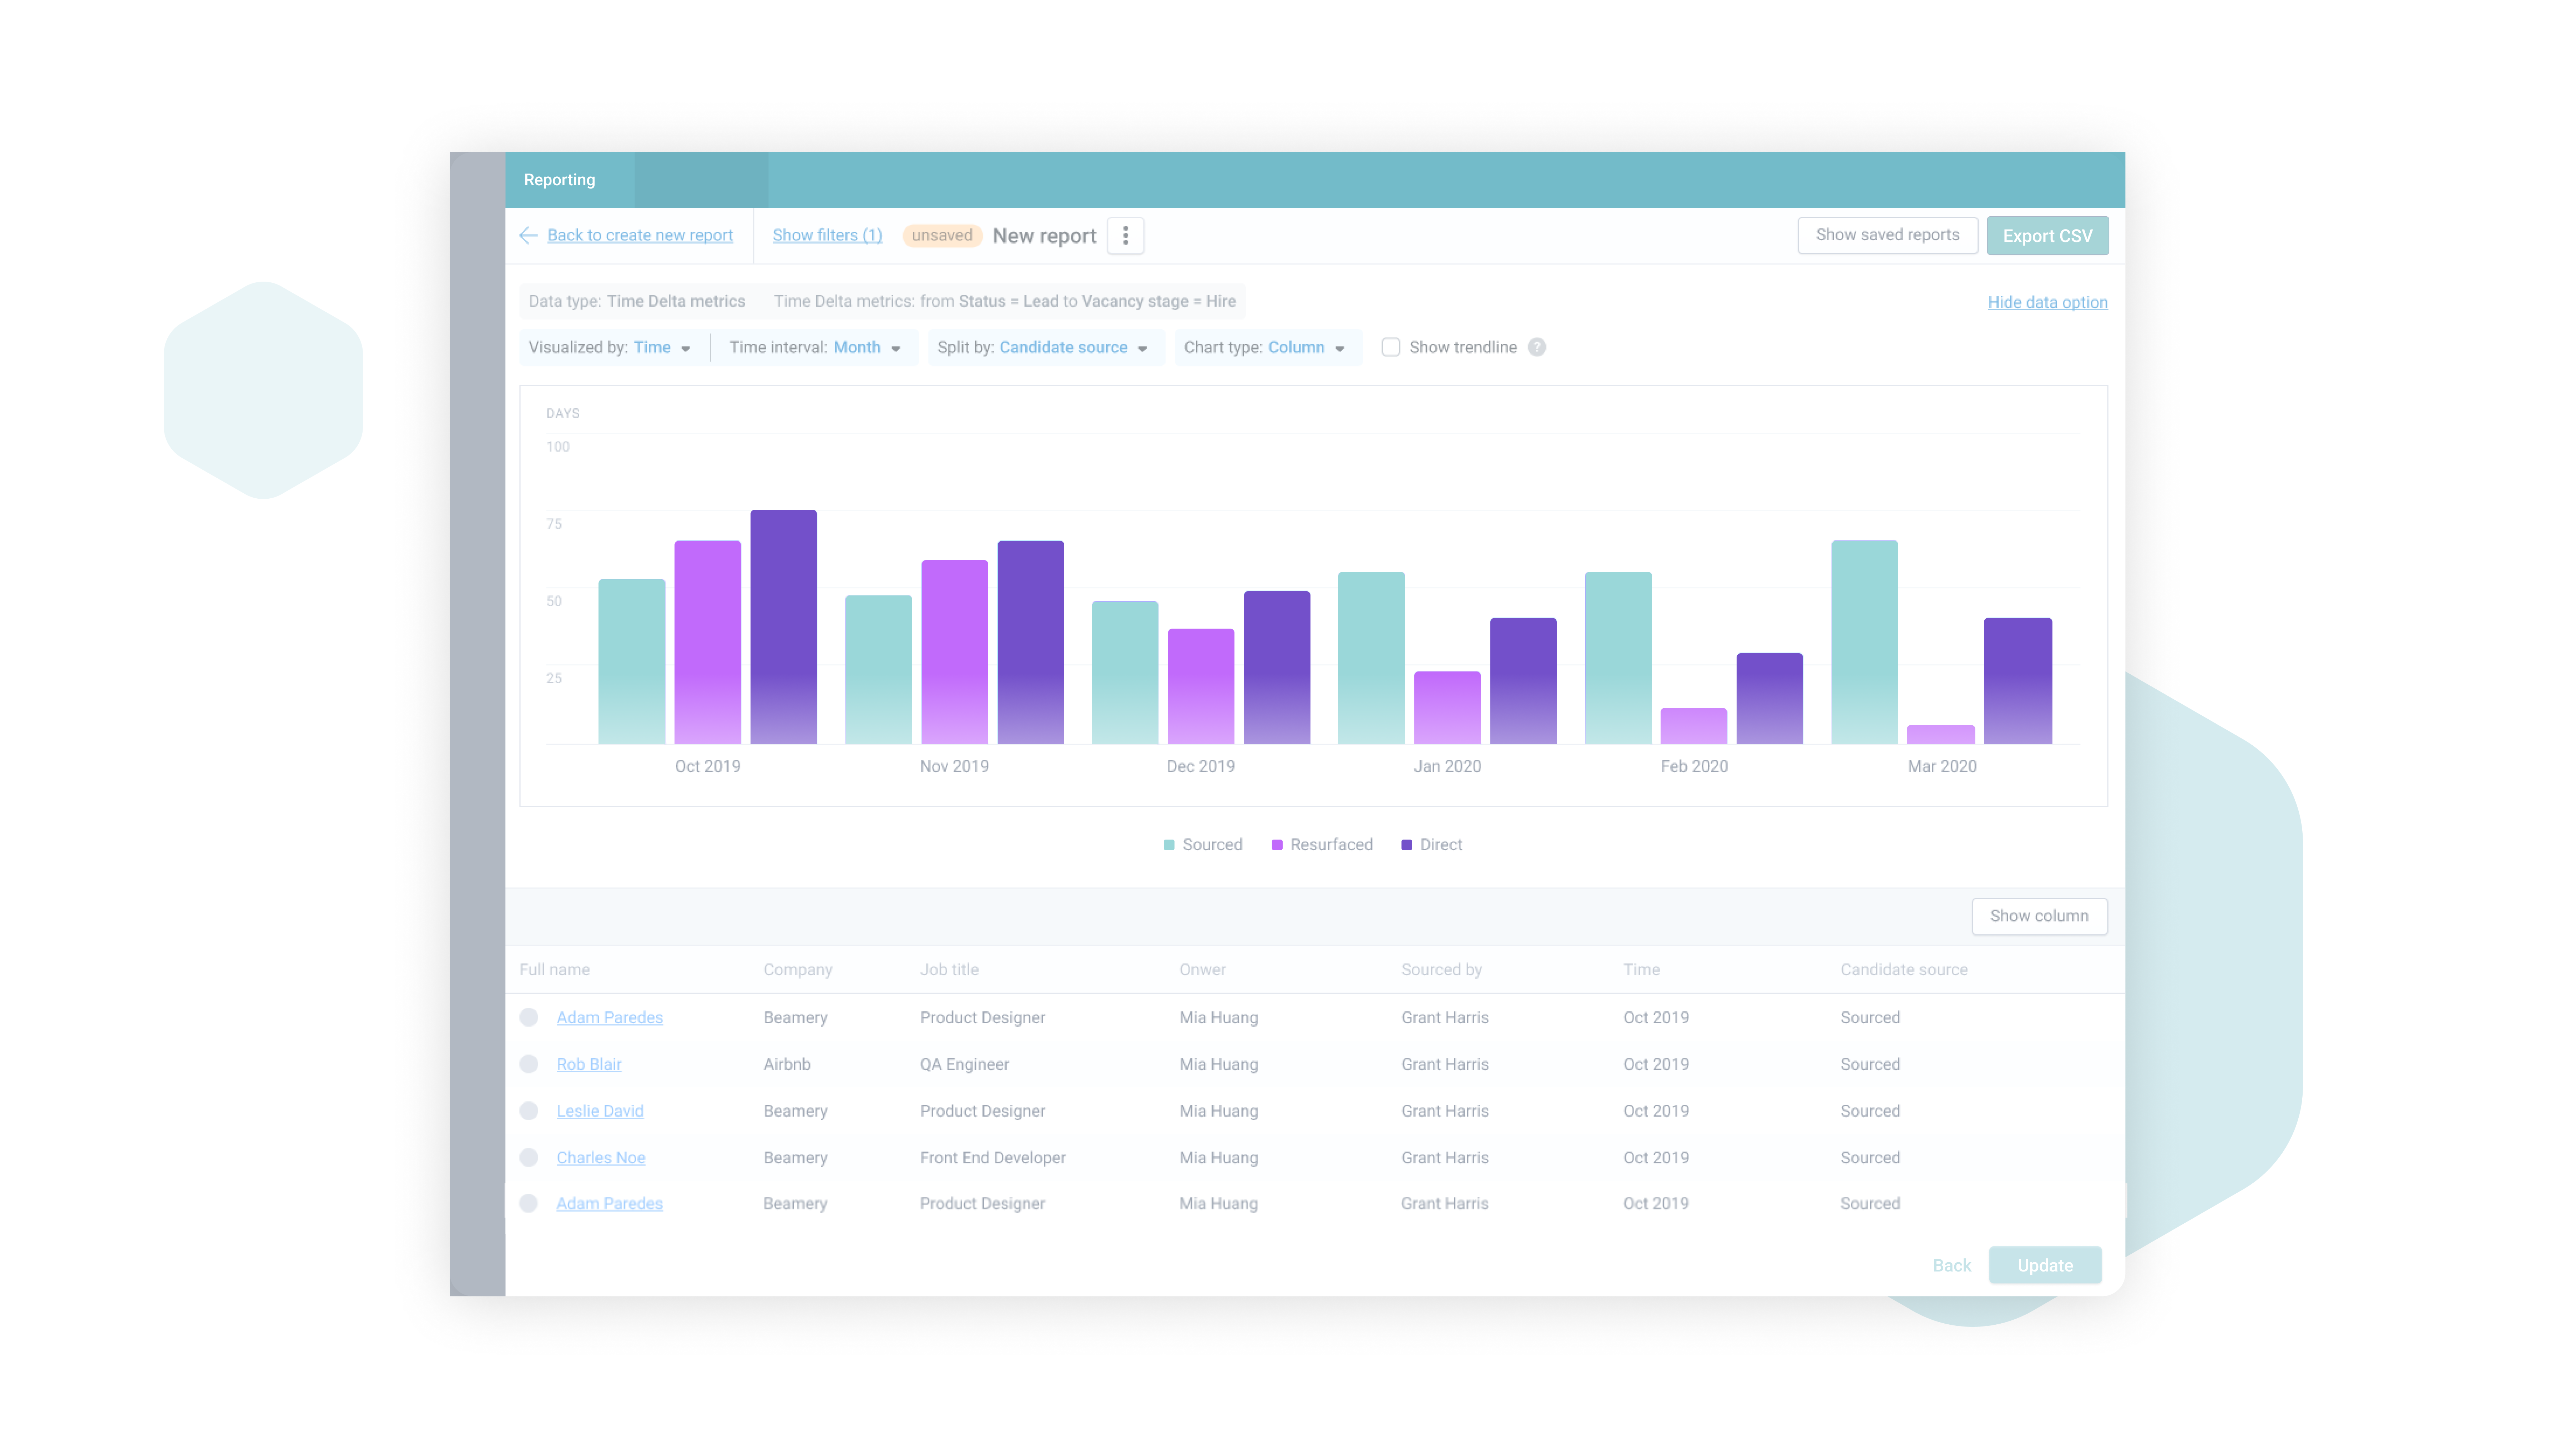 ccess customer reporting and talent intelligence across all your team and candidate data to track pipeline development, manage key initiatives and optimize processes.